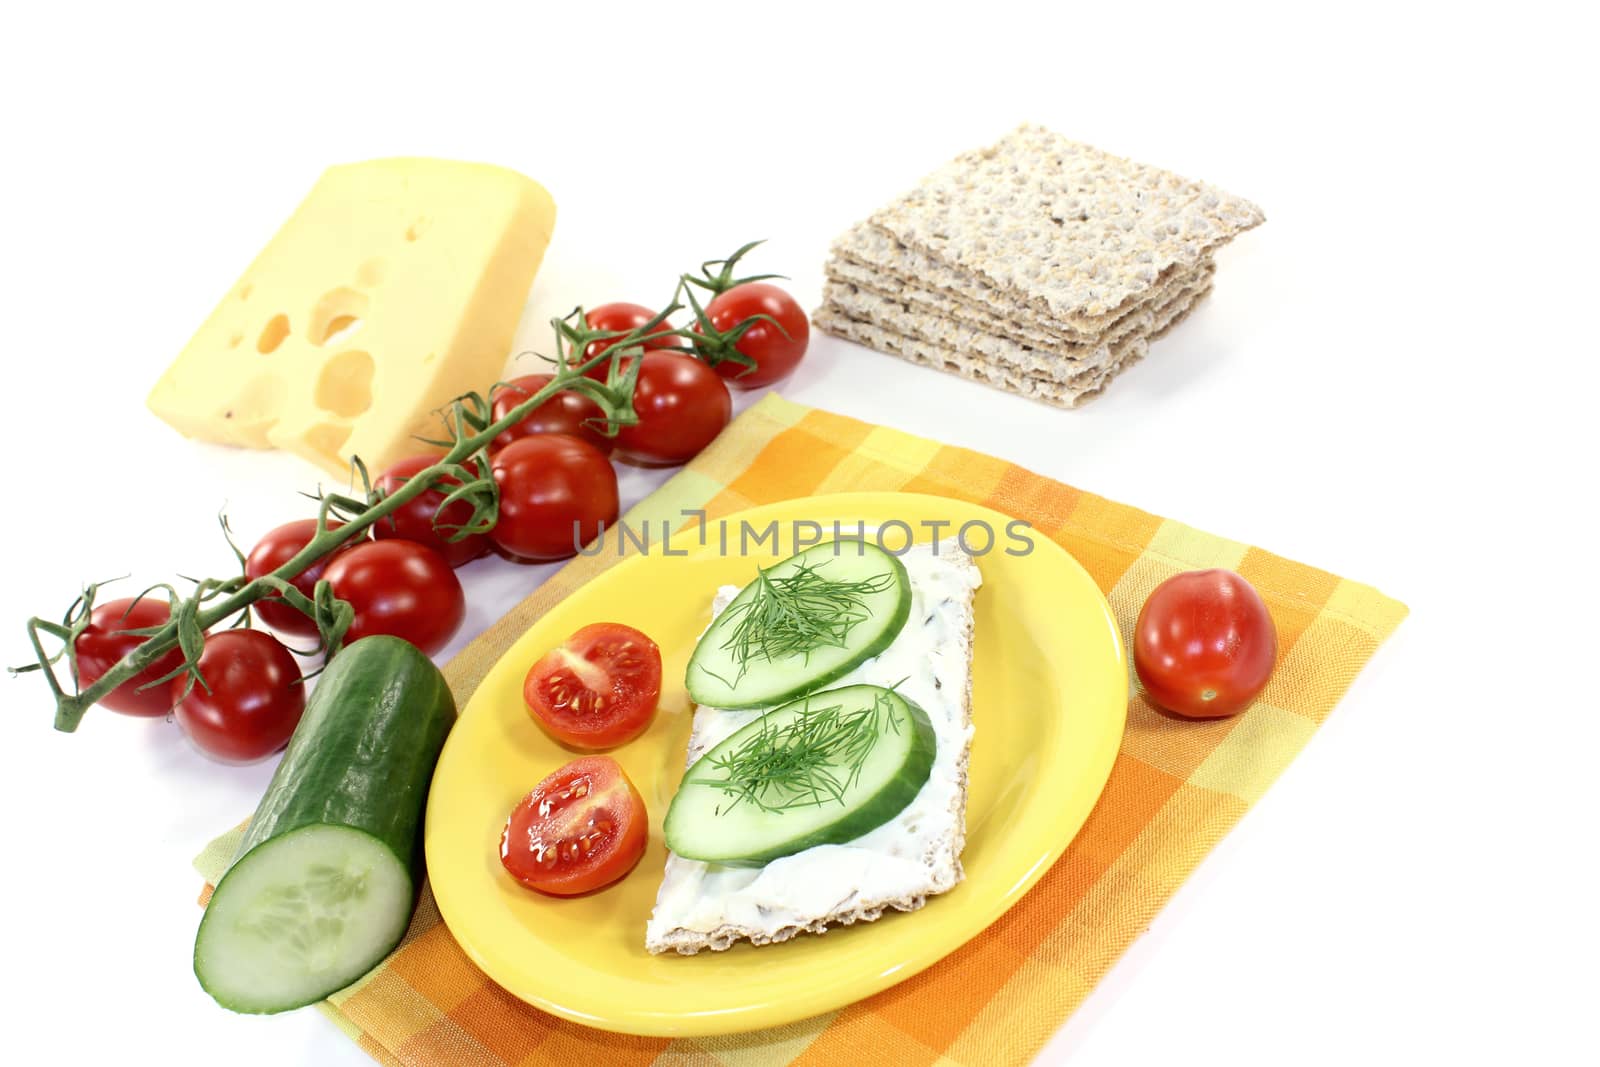 Crispbread with cream cheese and cucumber by discovery